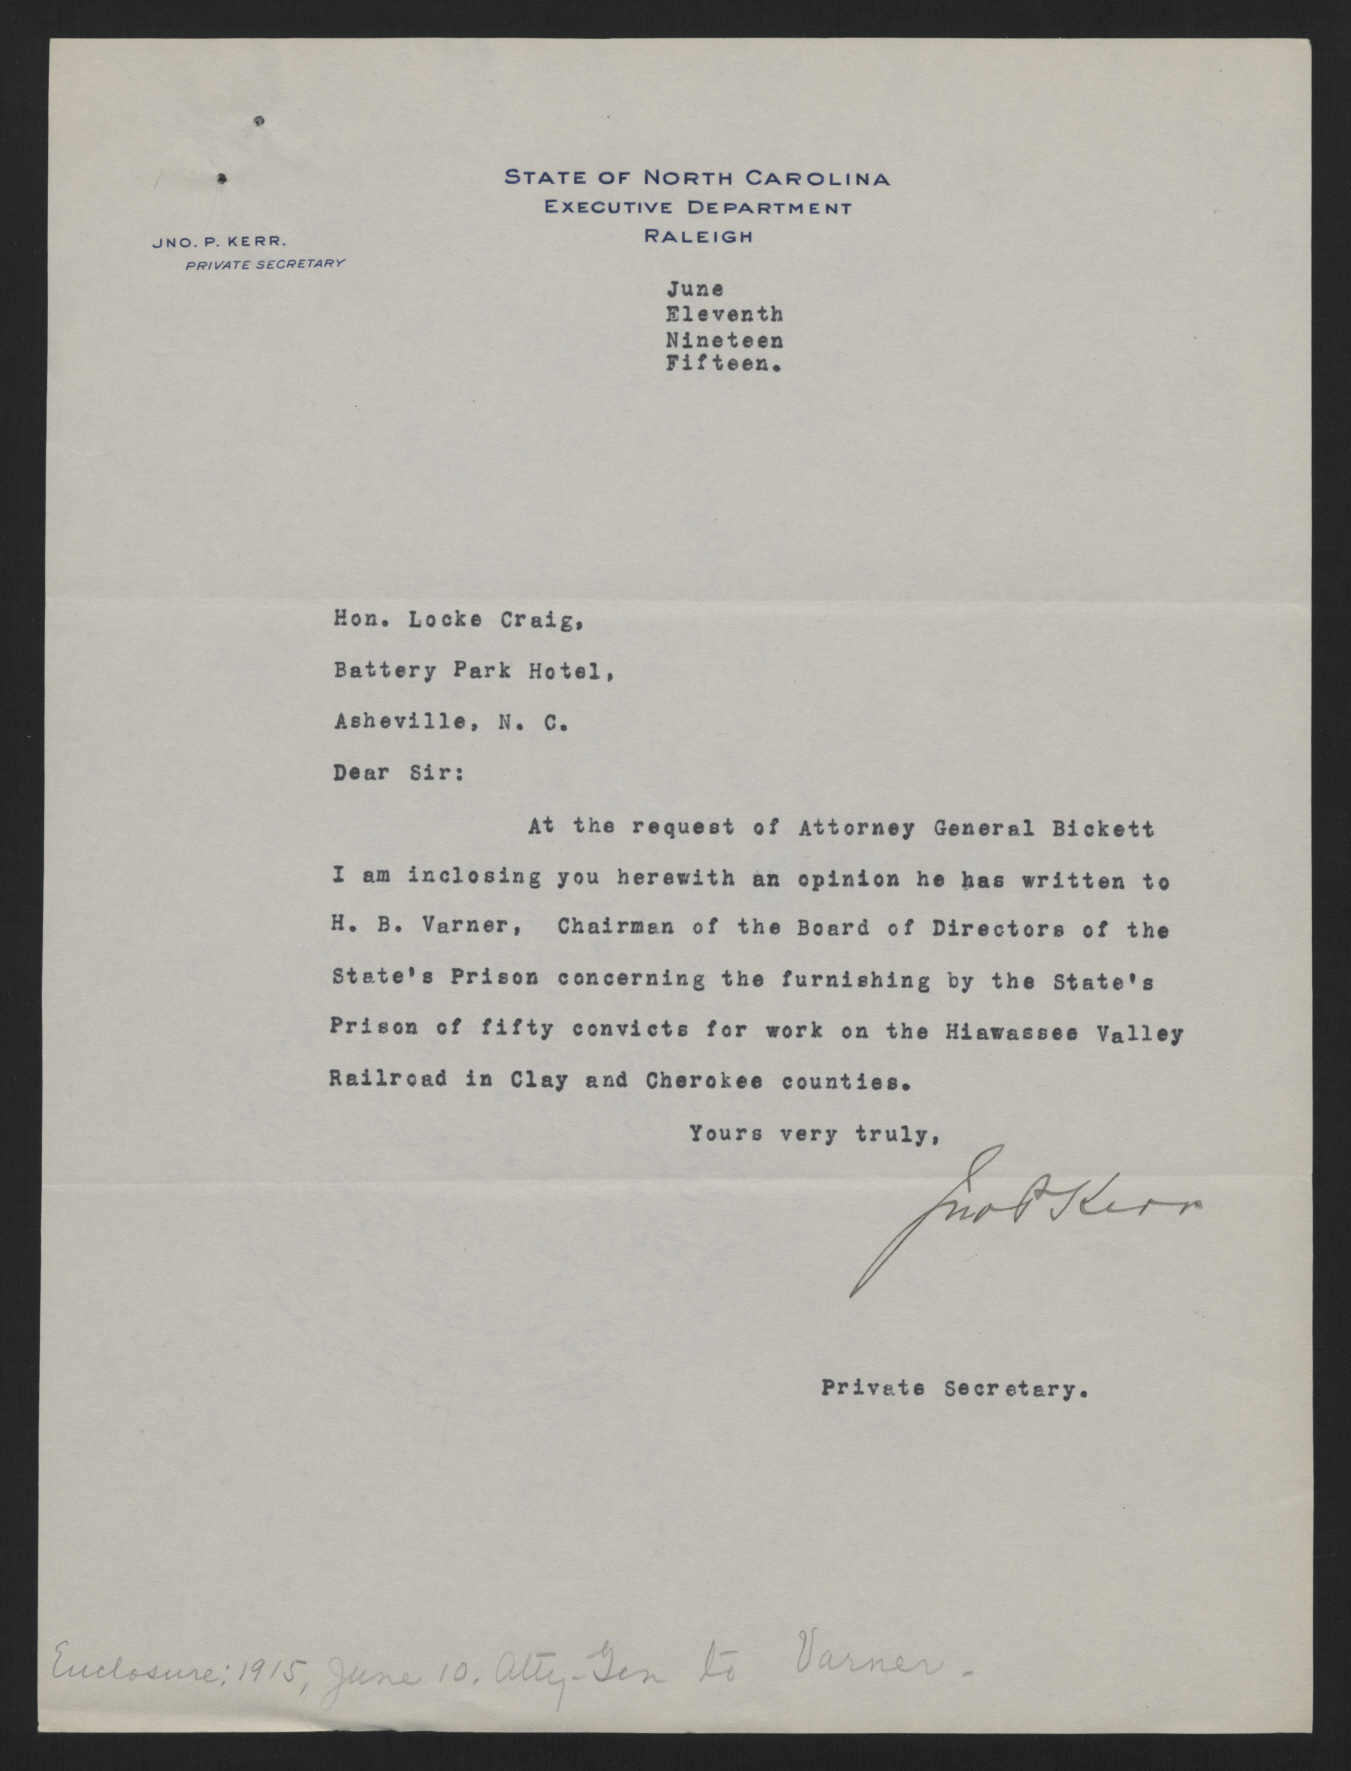 Letter from Kerr to Craig, June 11, 1915